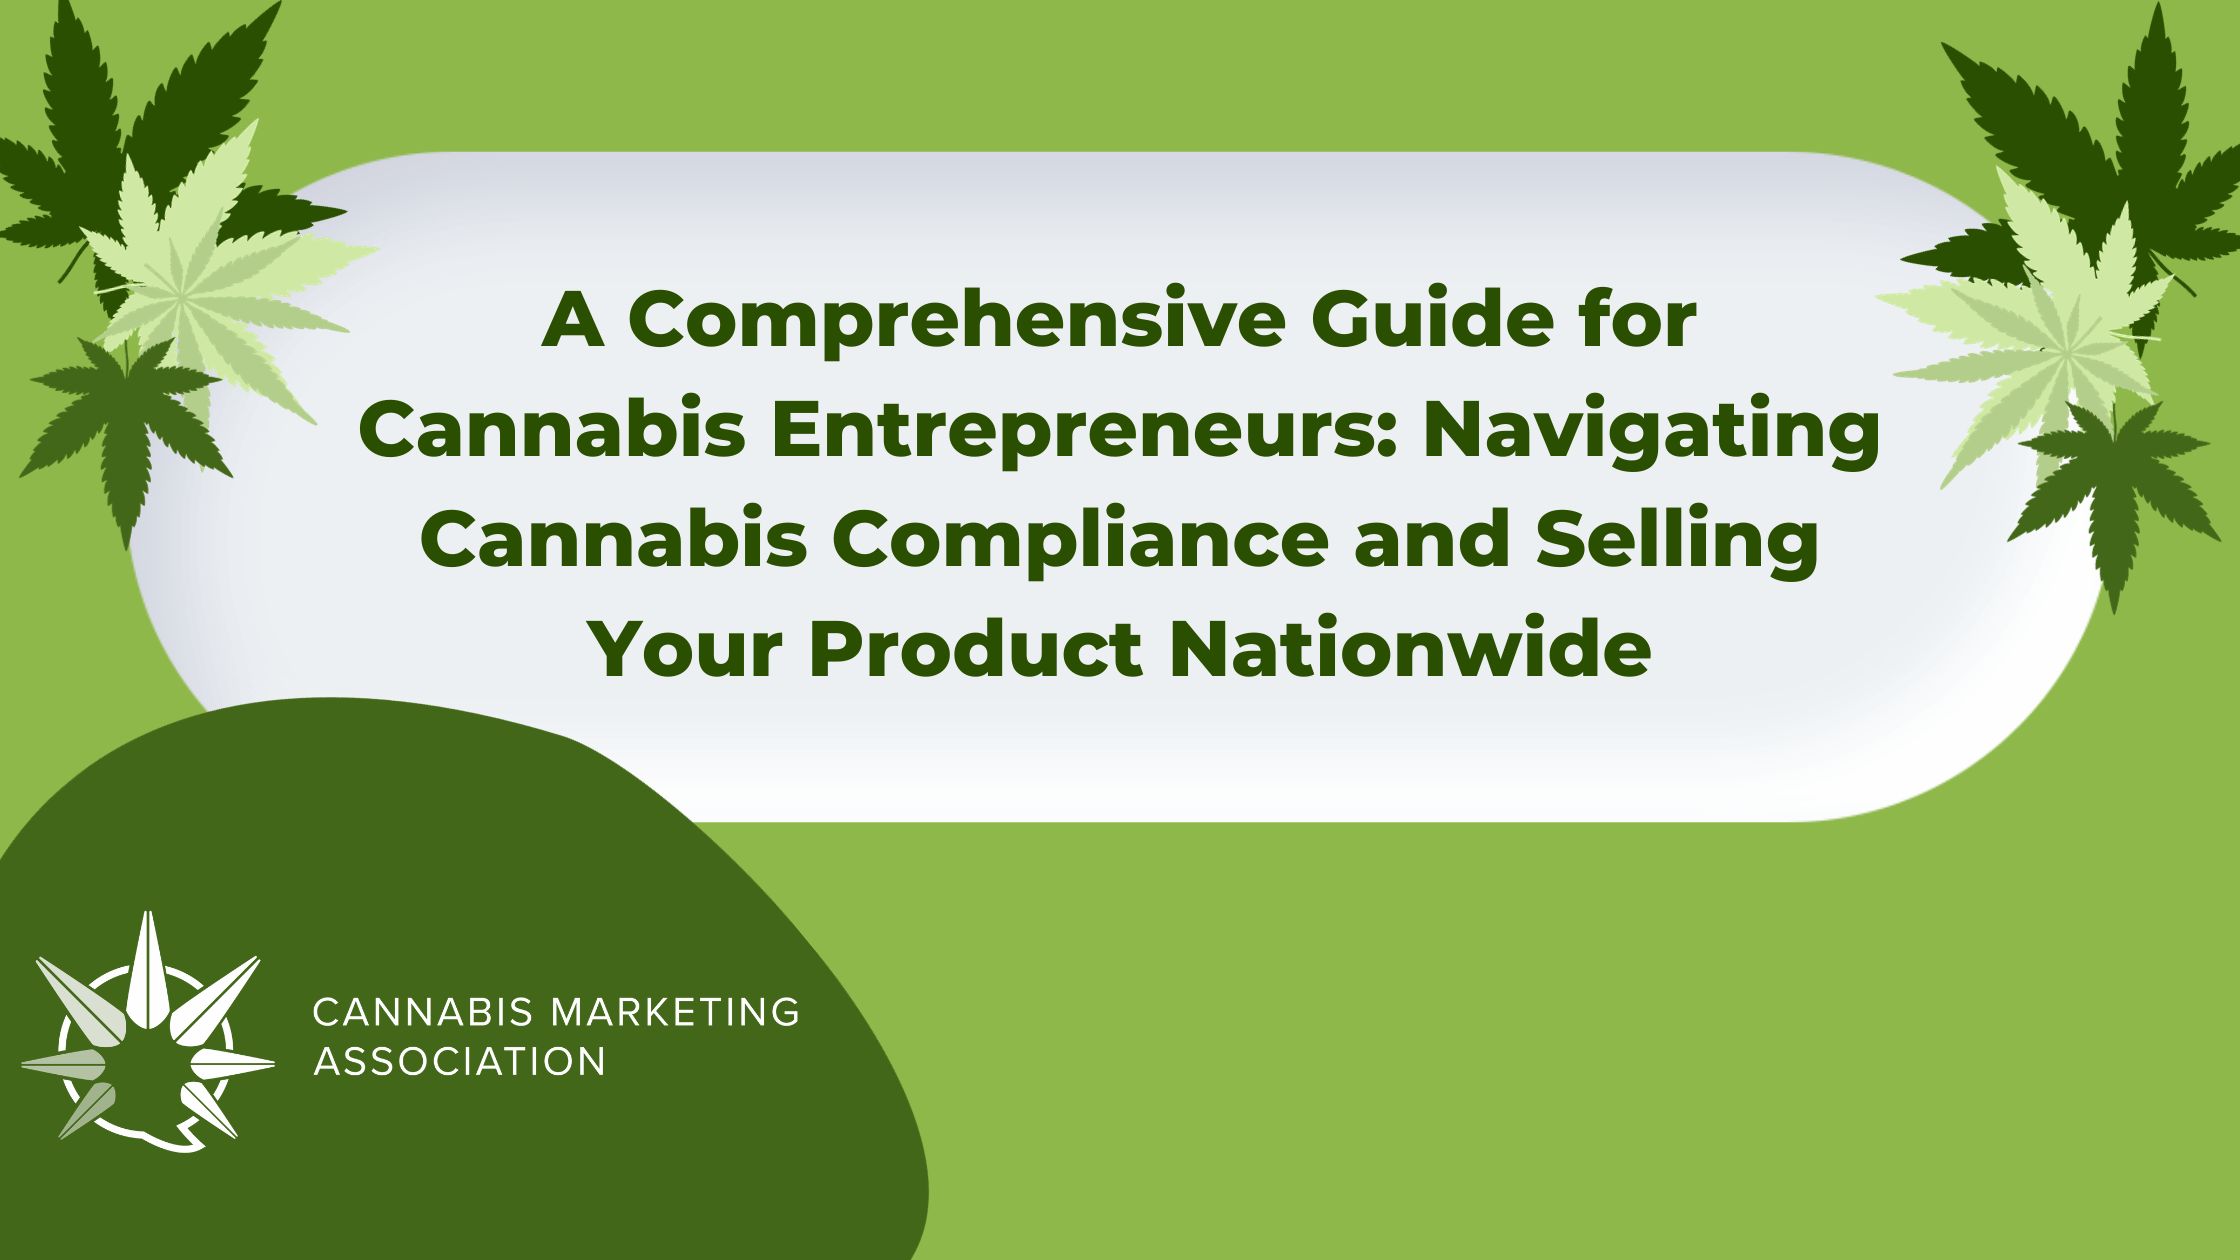 A Comprehensive Guide for Cannabis Entrepreneurs: Navigating Cannabis Compliance and Selling Your Product Nationwide